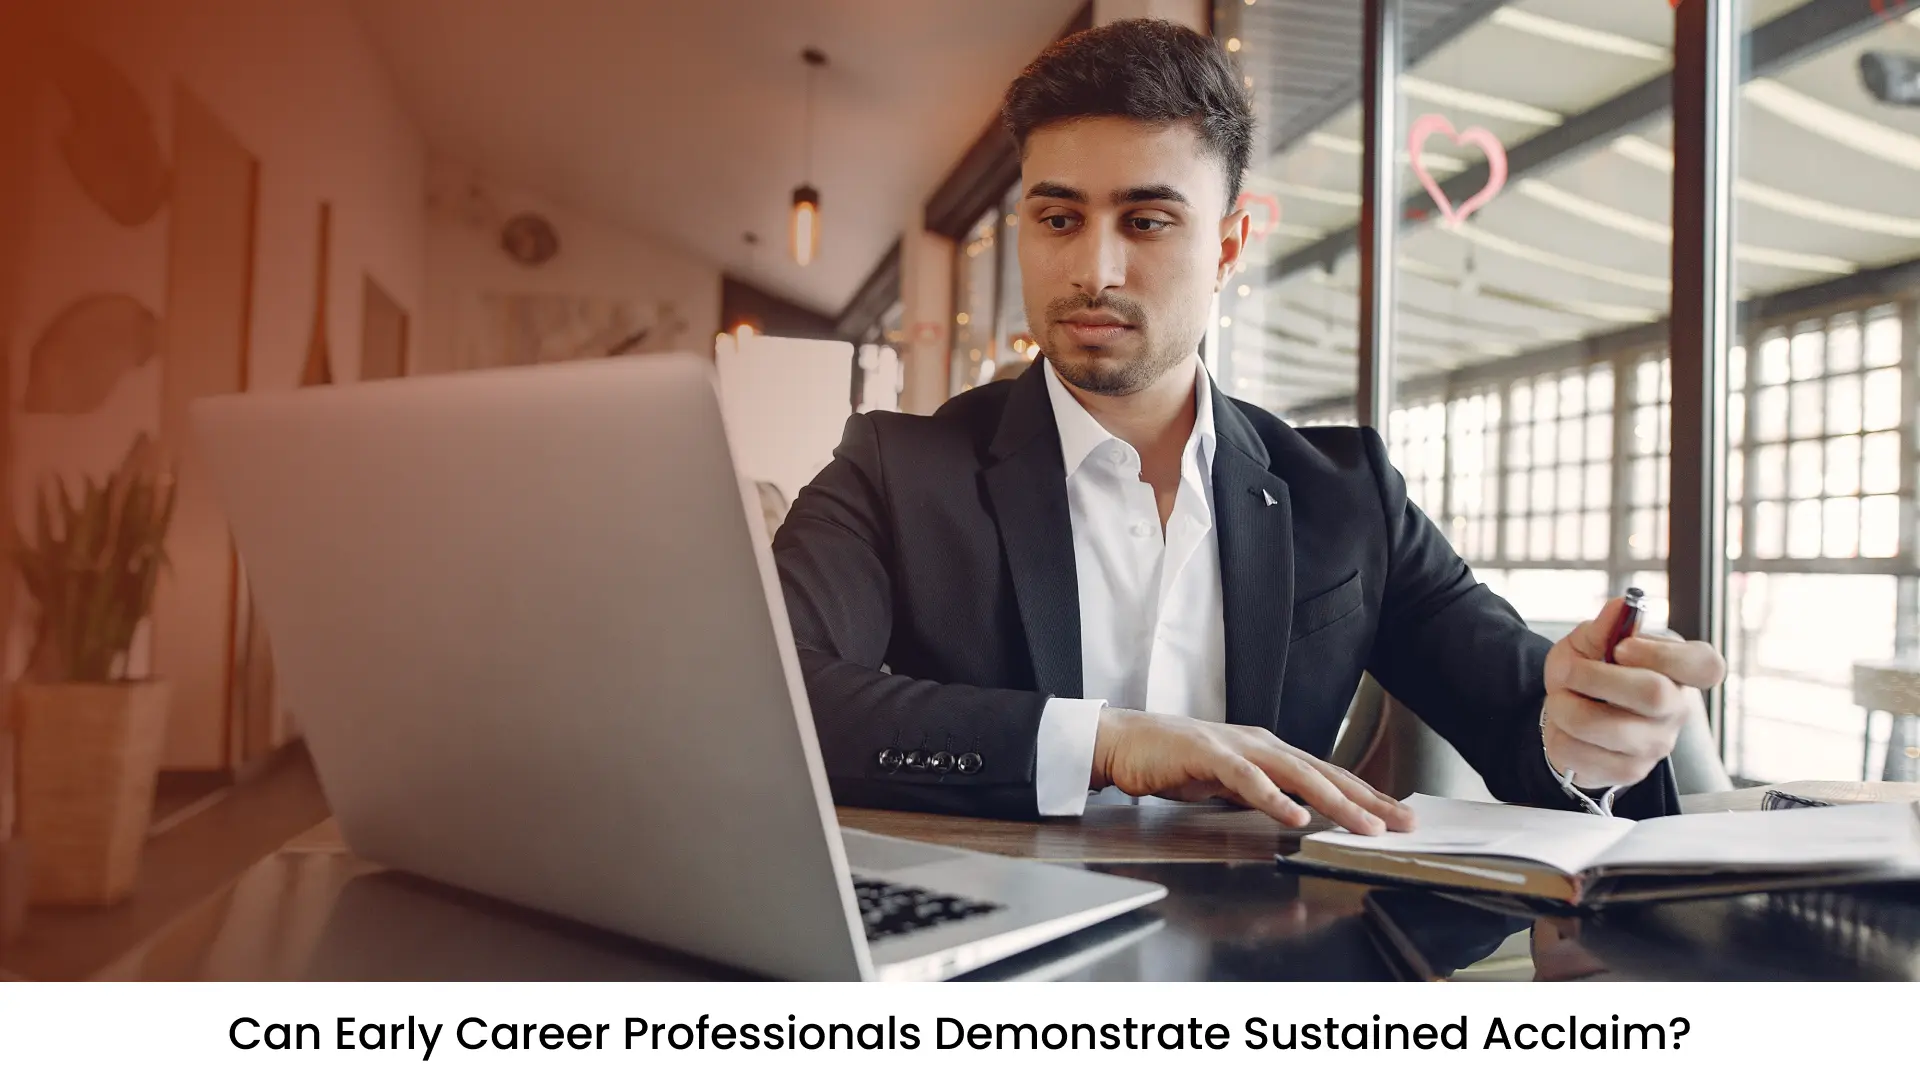 Can Early Career Professionals Demonstrate Sustained Acclaim?